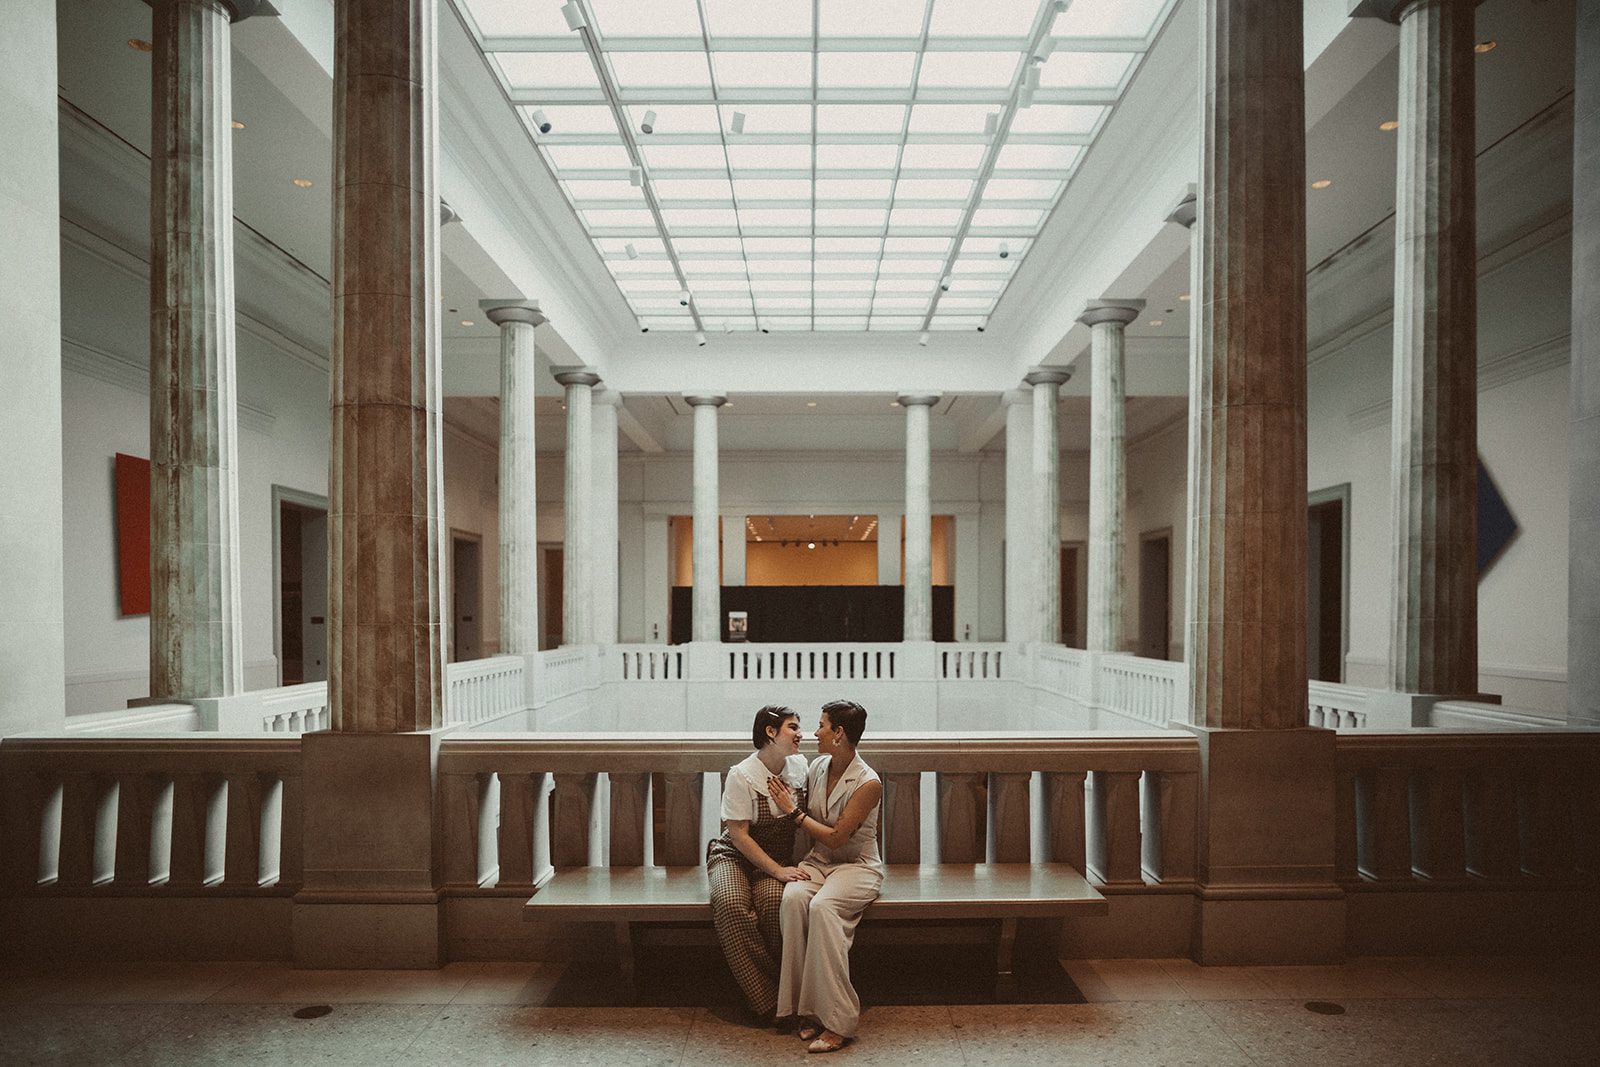 A grand room of columns and pillars with the couple sitting in the middle on the bench holding one another.